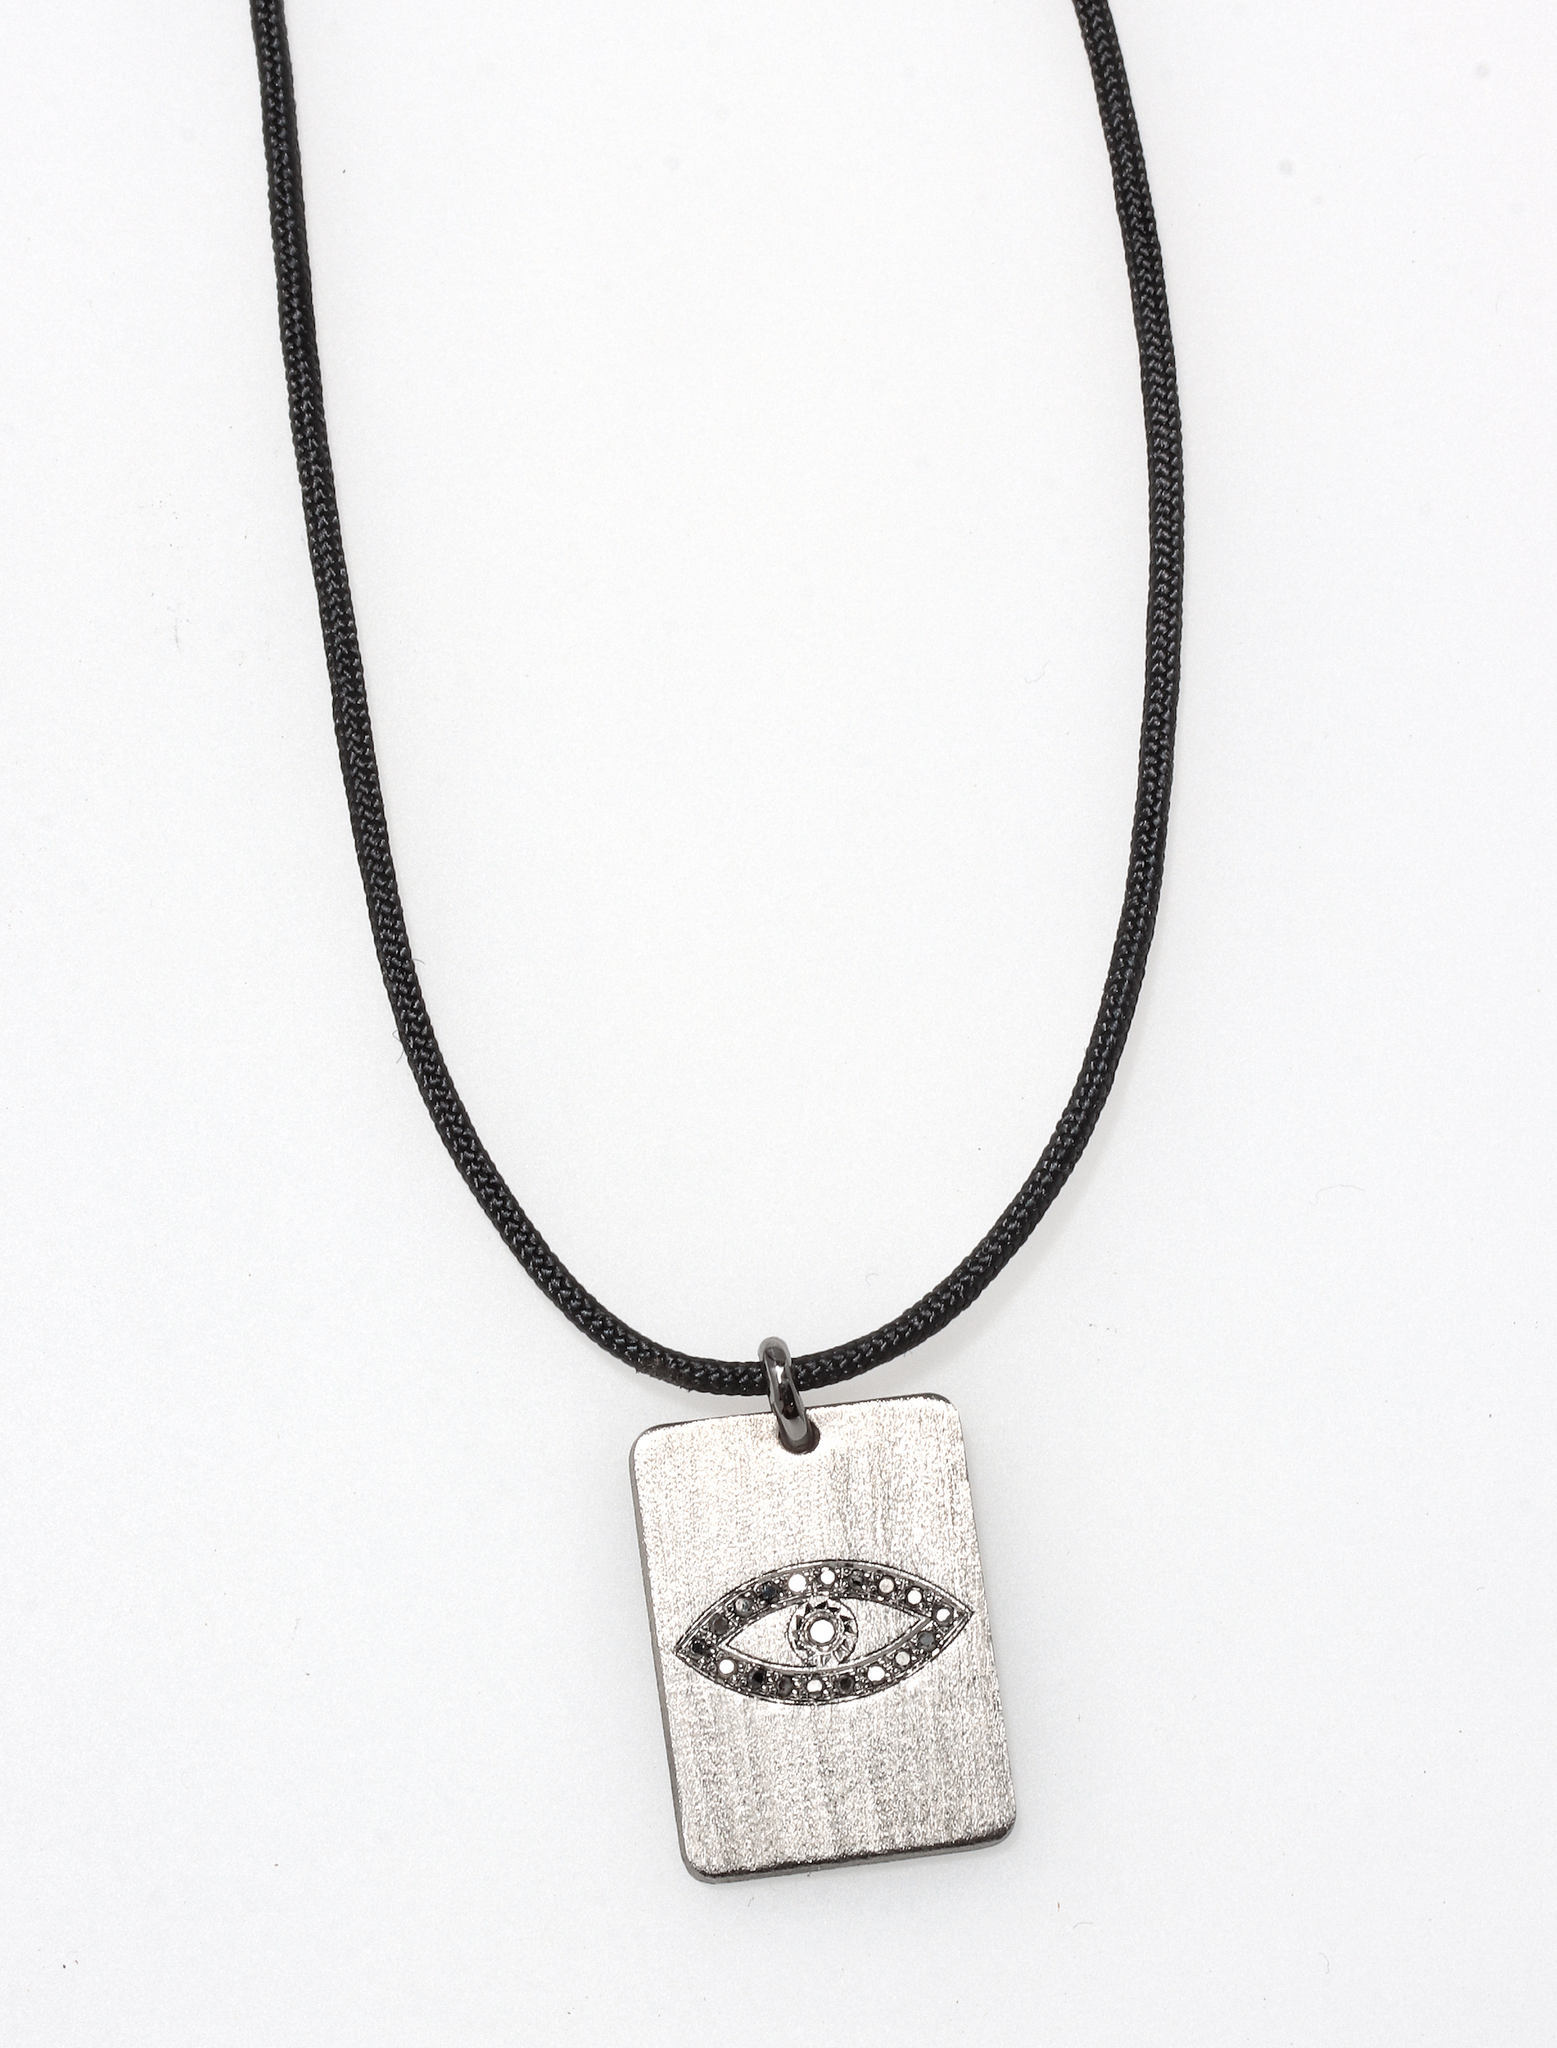 PROTECTIVE EYE BLACK PLATED NECKLACE